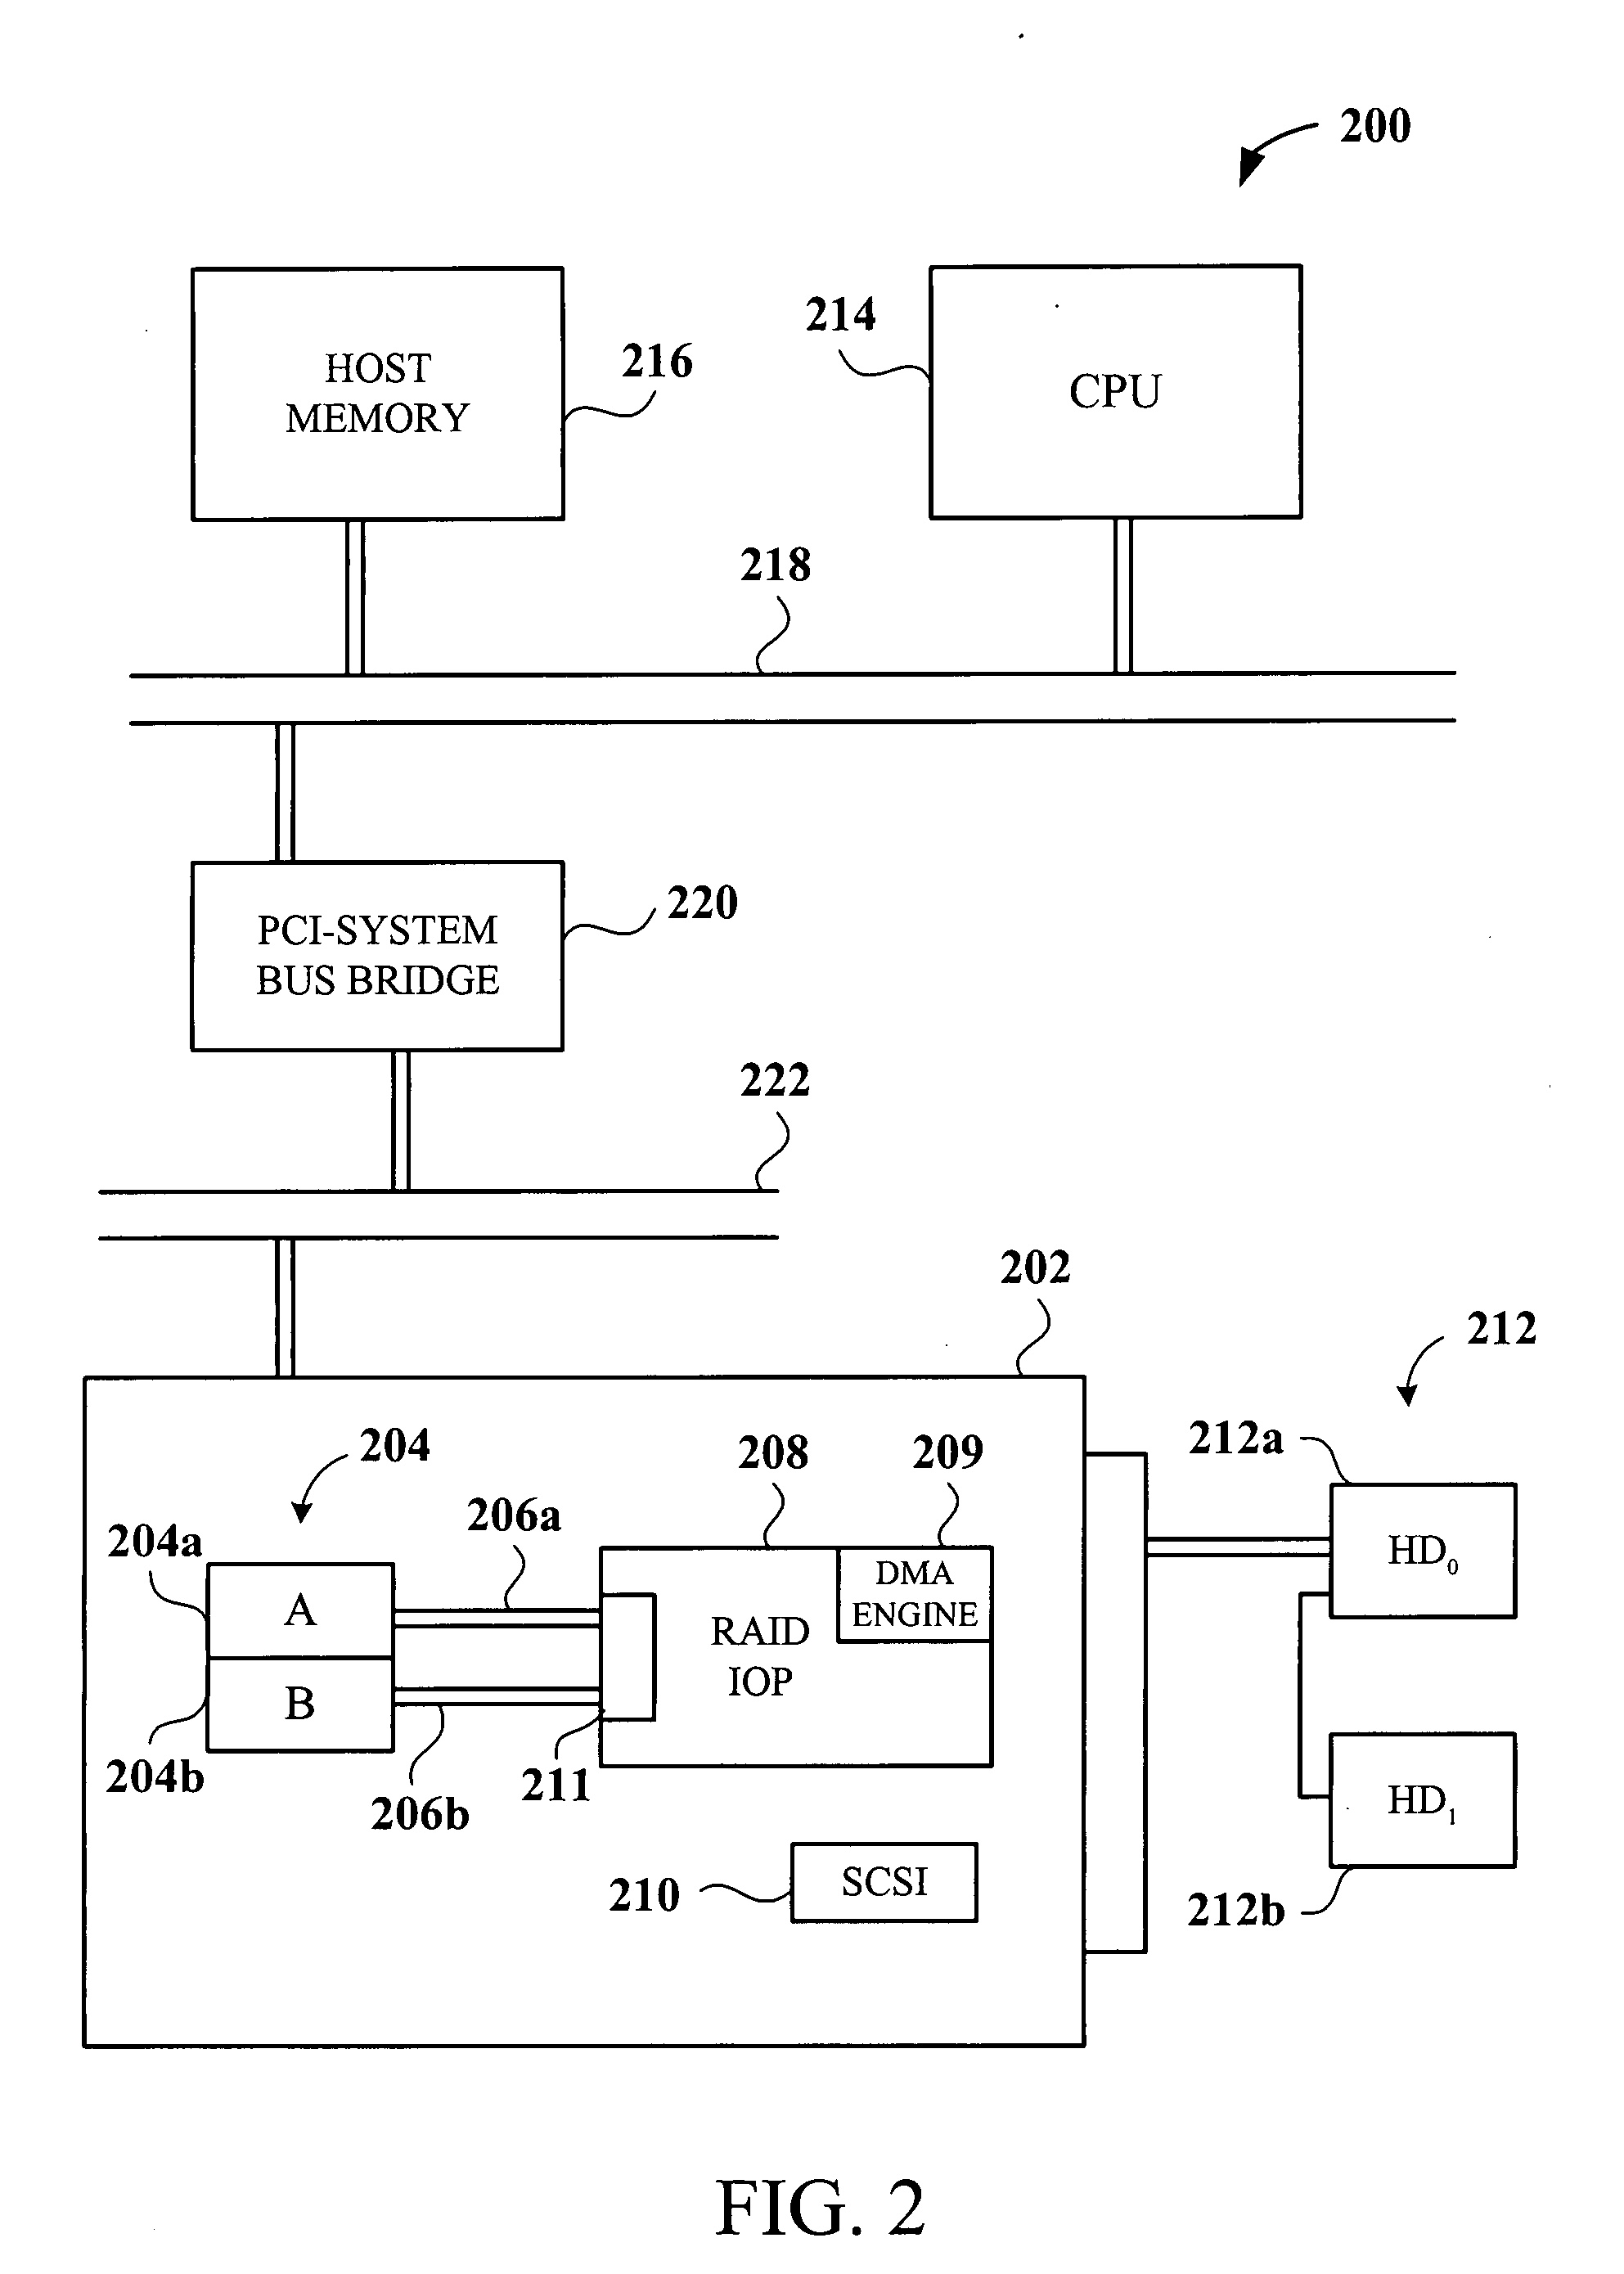 Method and apparatus for raid on memory